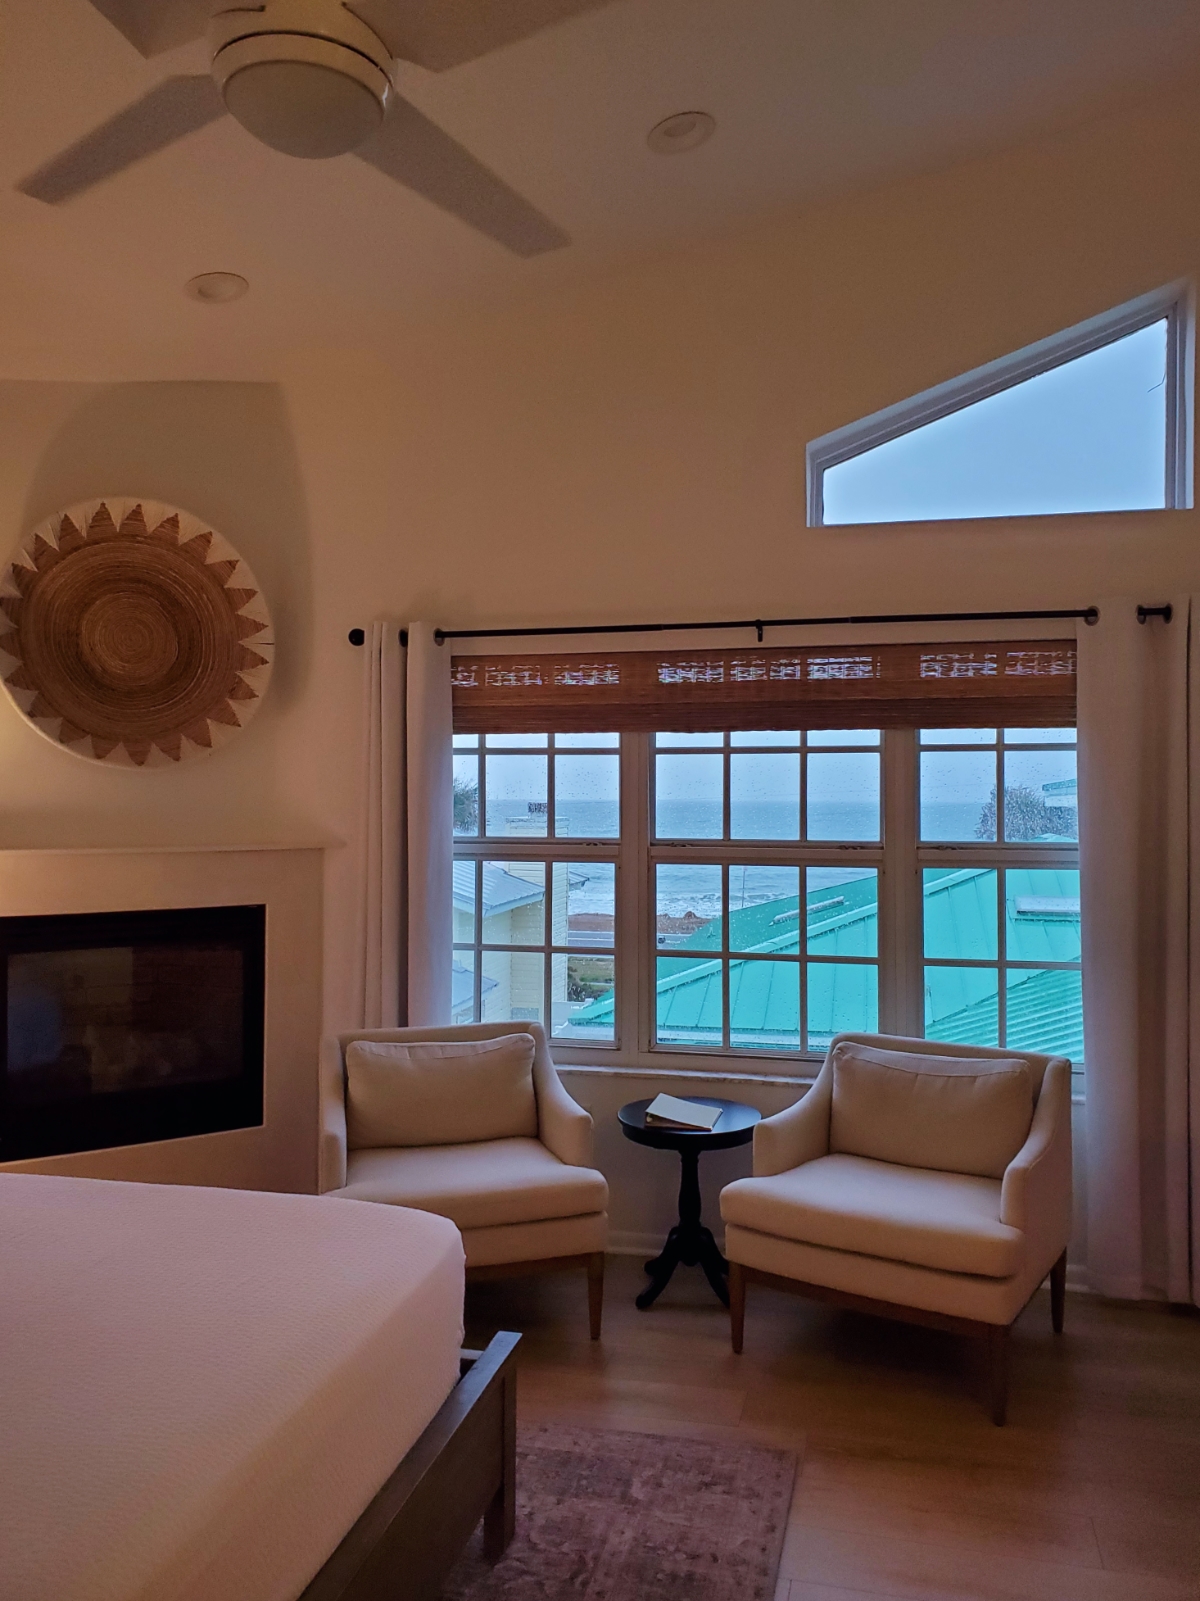 Island Cottage Inn in Flagler Beach, Suite 2. We arrived during a rainstorm but found this peaceful sanctuary.